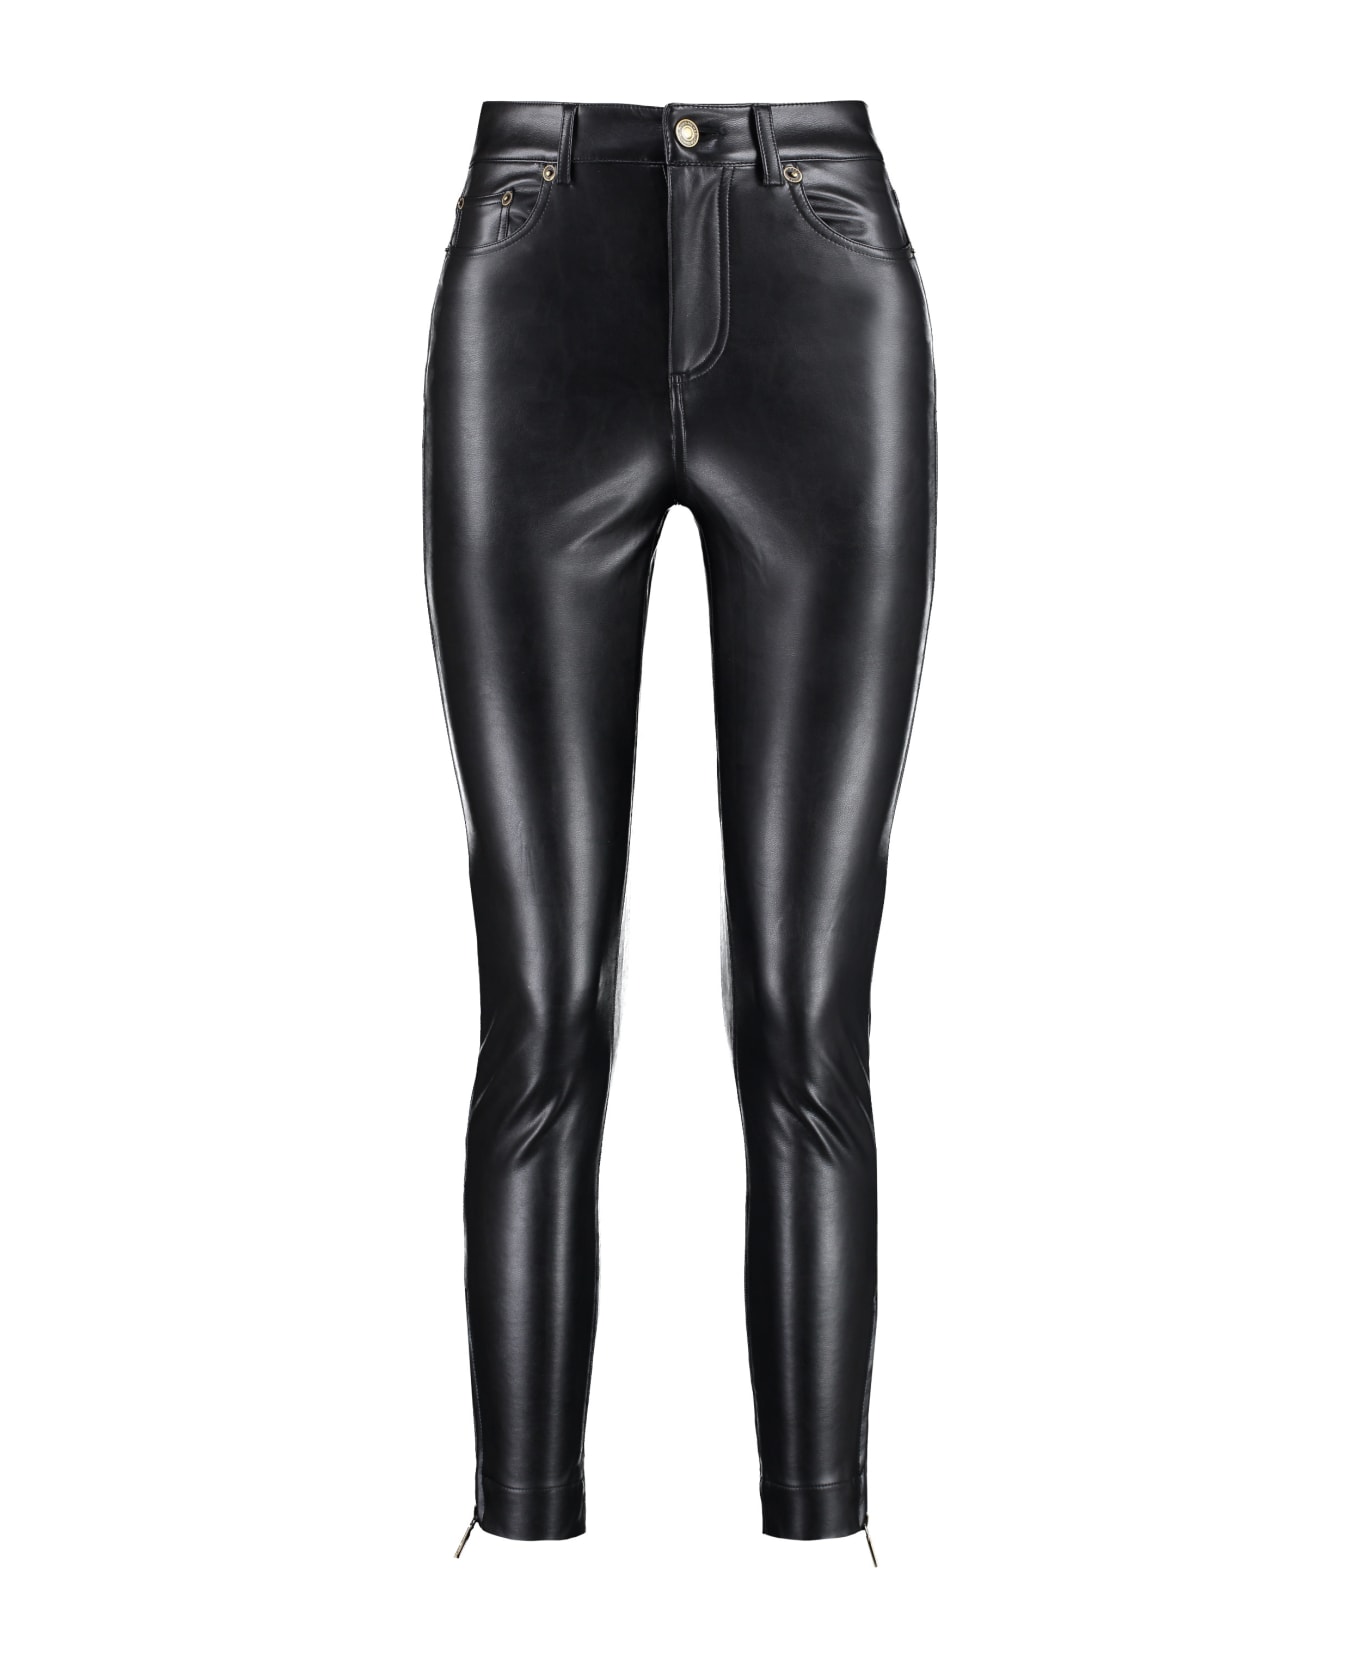 MICHAEL Michael Kors Faux Leather Trousers - black ボトムス